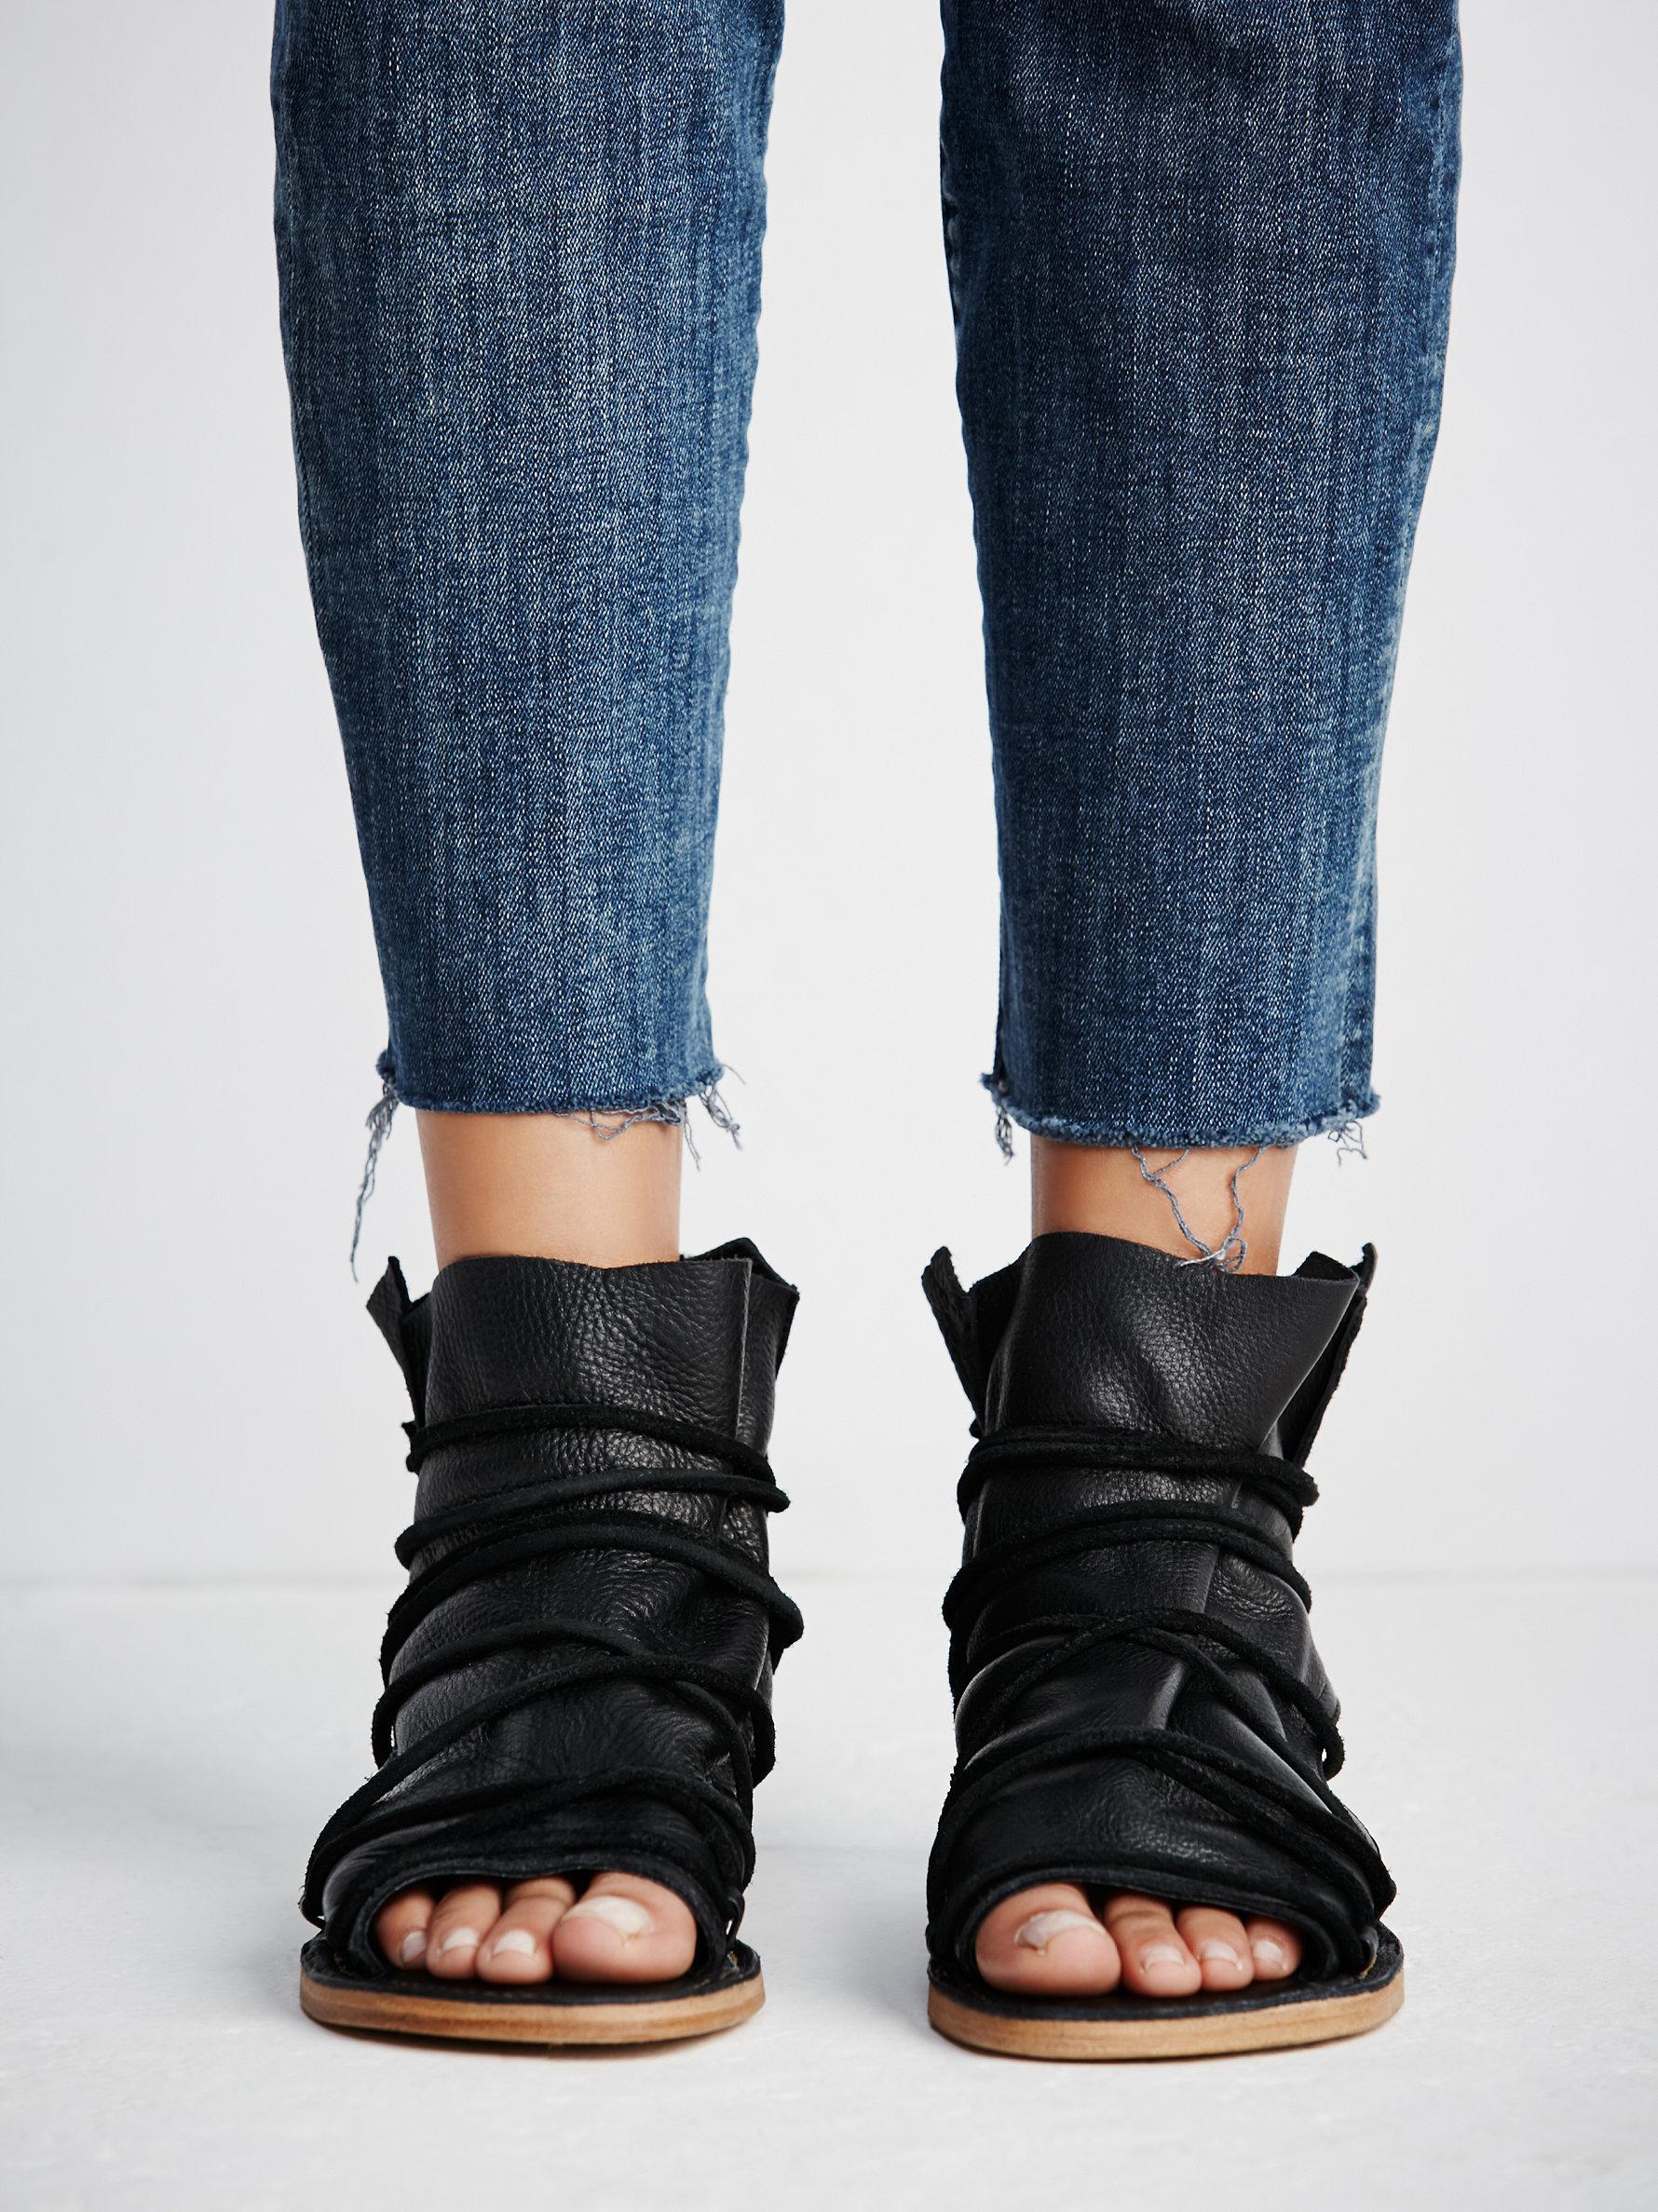 Free People Lavery Boot Sandal in Black | Lyst